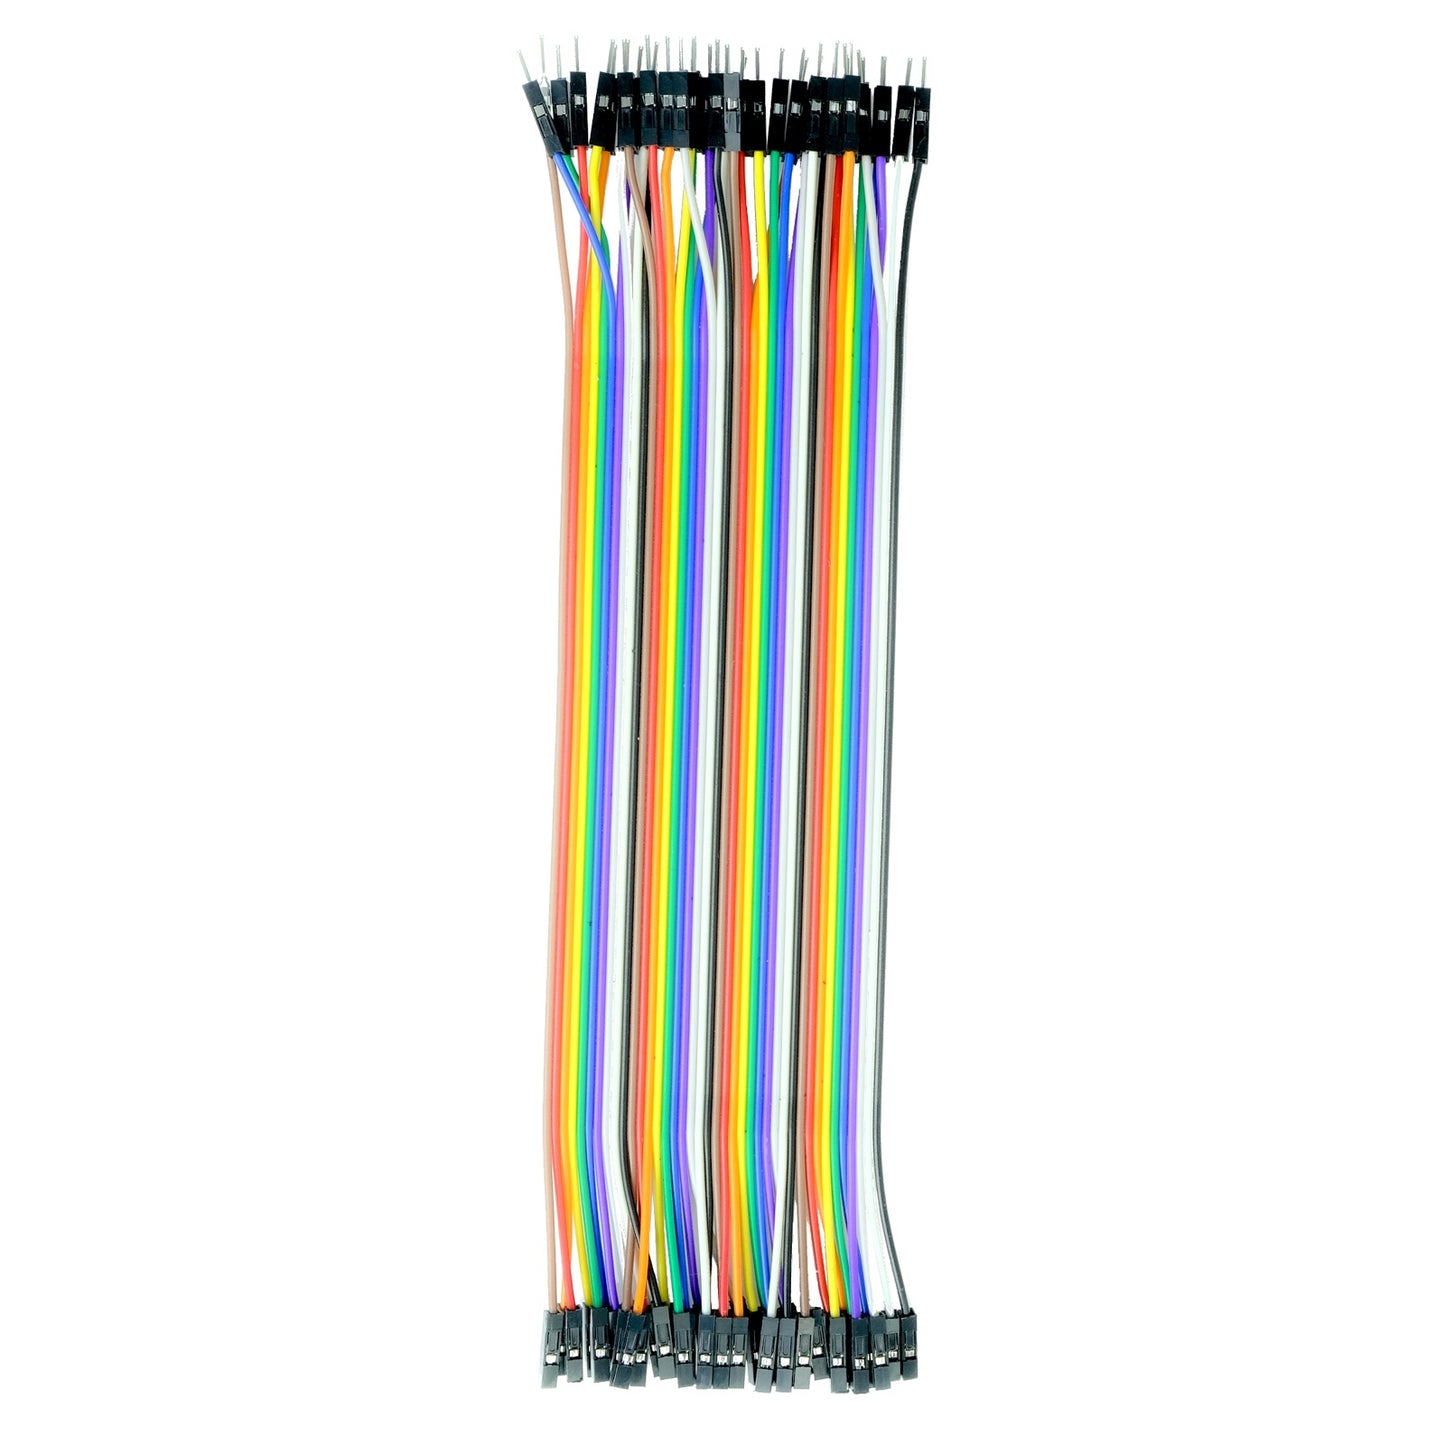 Dupont Wires, Male-Female, 40-pin Flat Cable, 20 cm